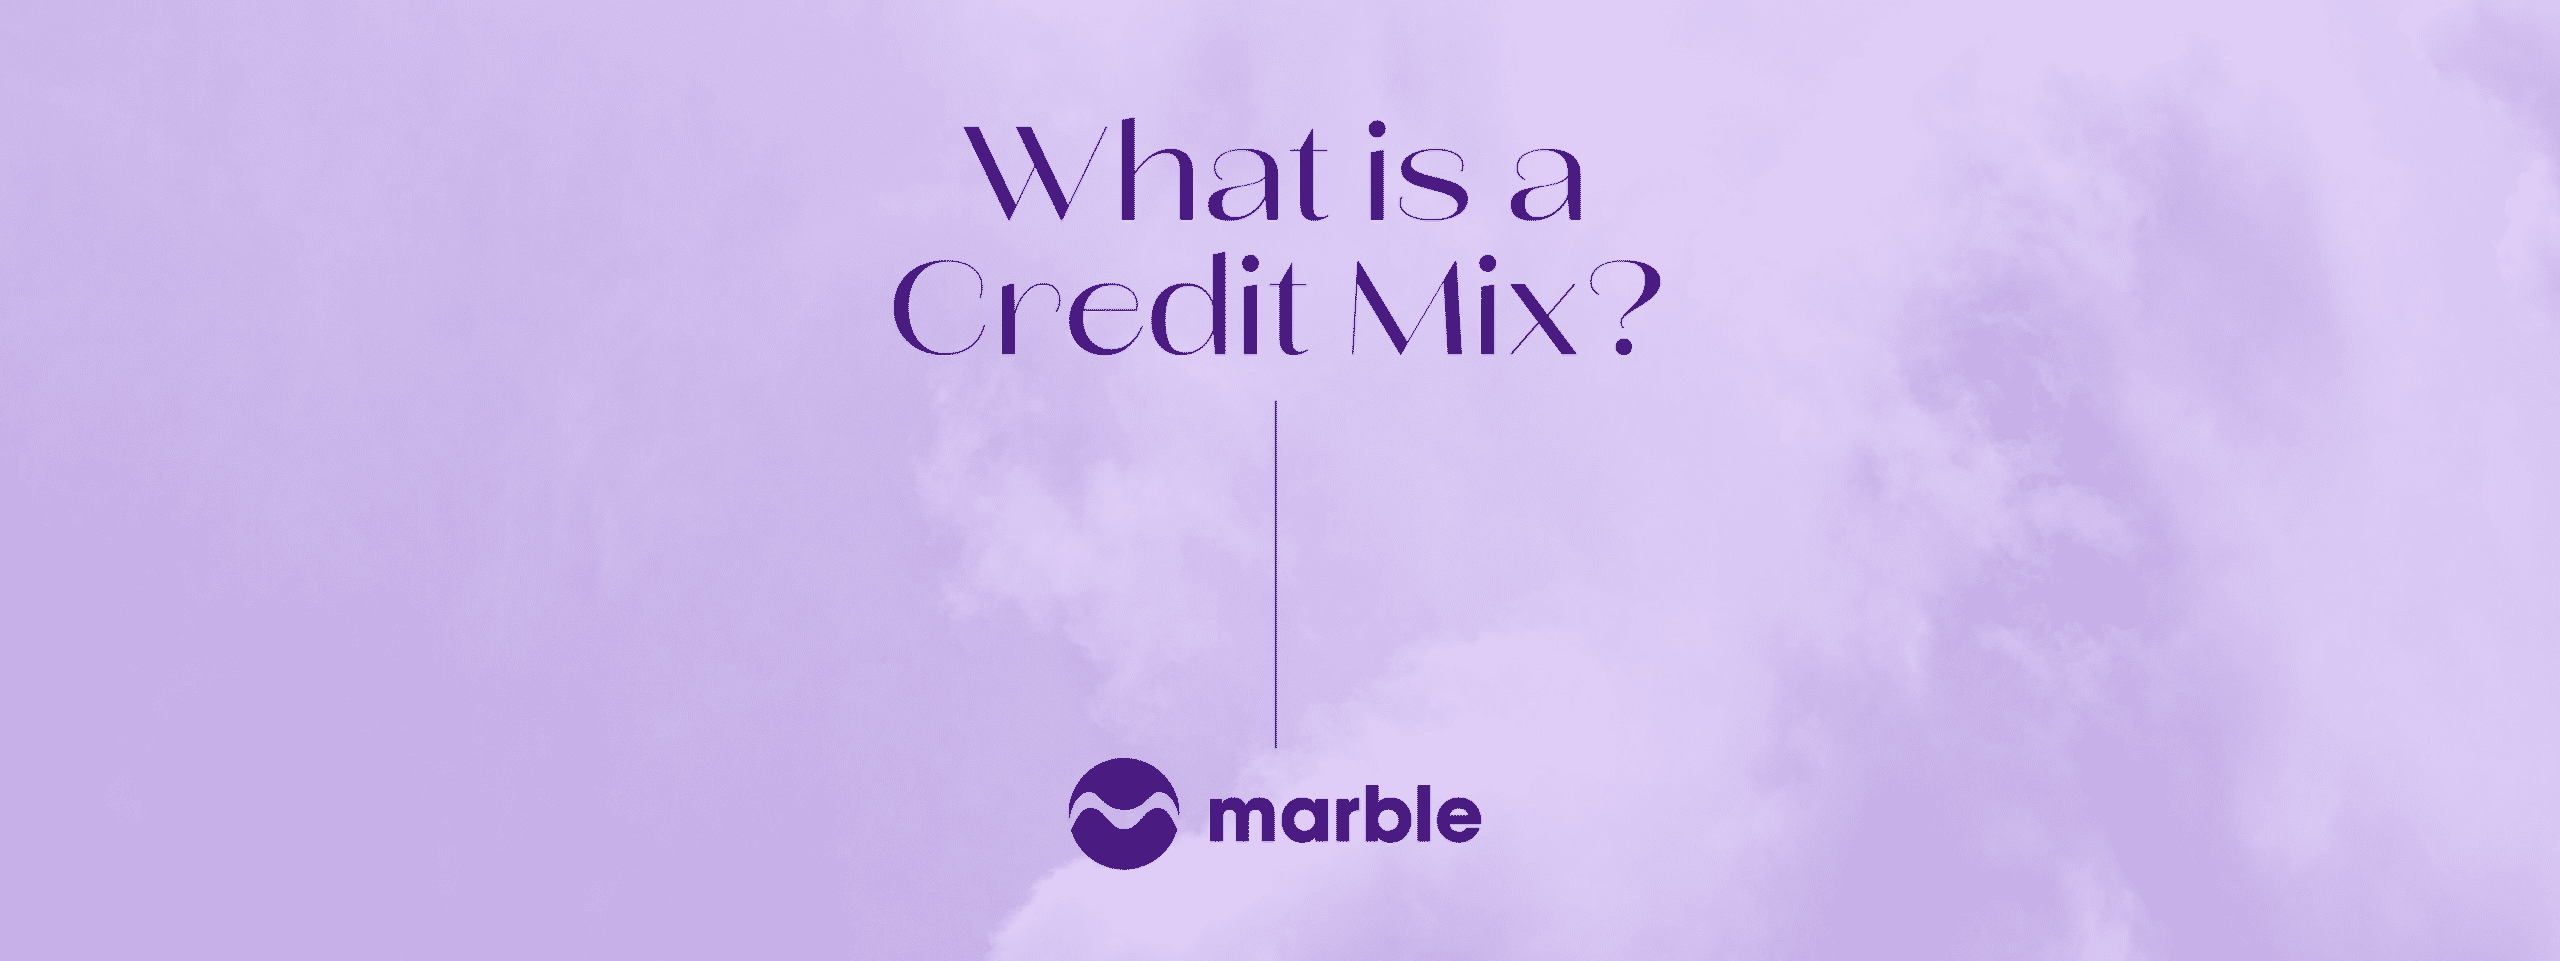 What is a credit mix